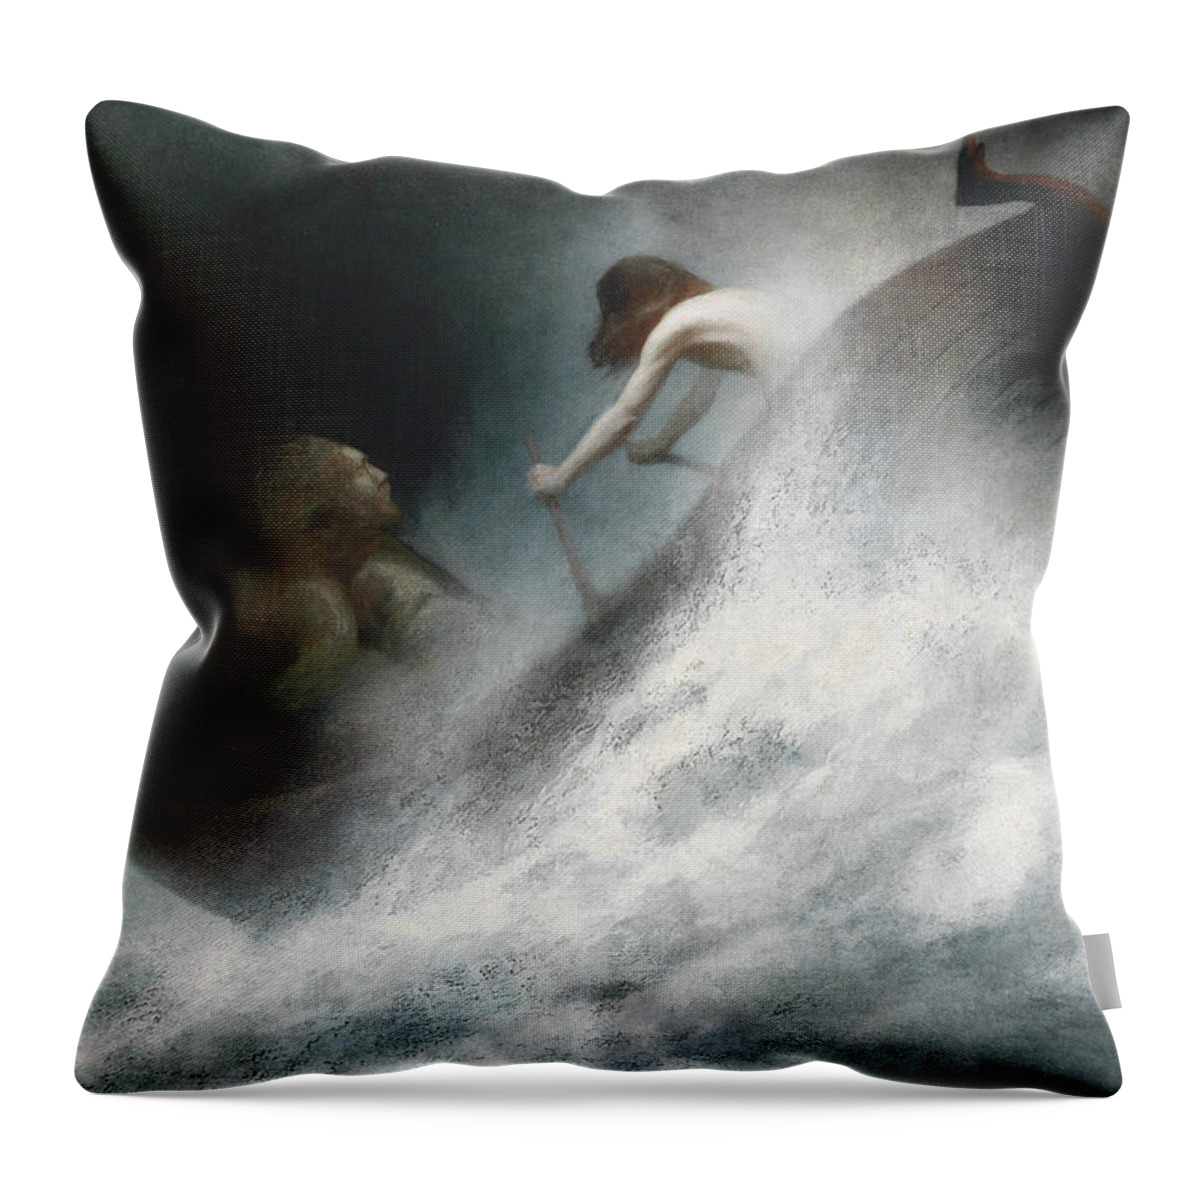 19th Century Art Throw Pillow featuring the painting The Rescue by Karl Wilhelm Diefenbach